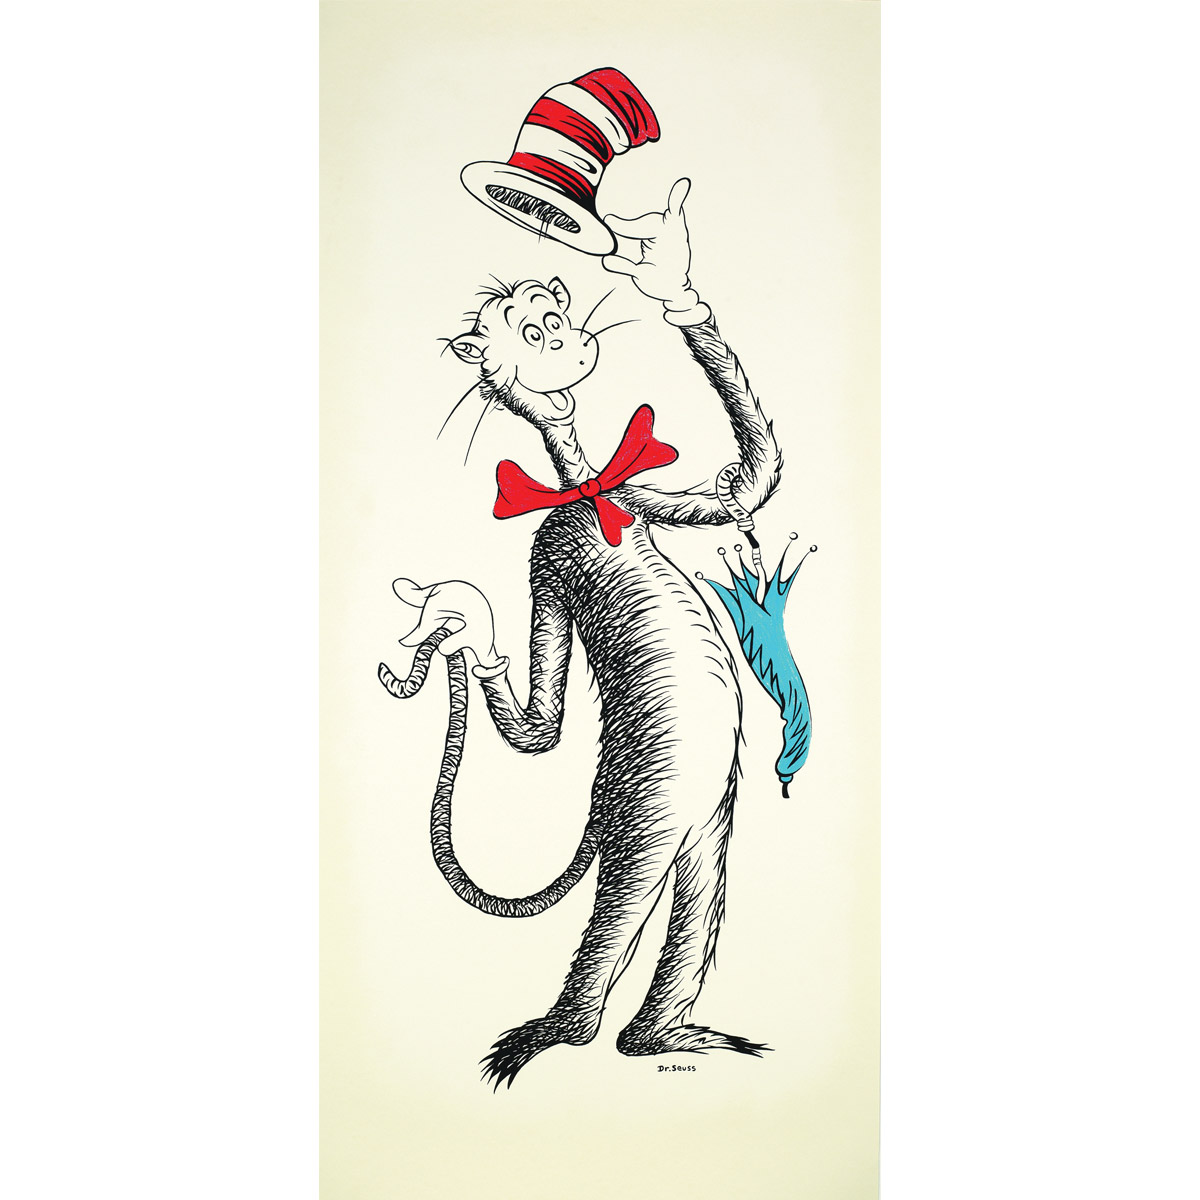 Ted's Cat - The Cat in the Hat 50th Anniversary Print